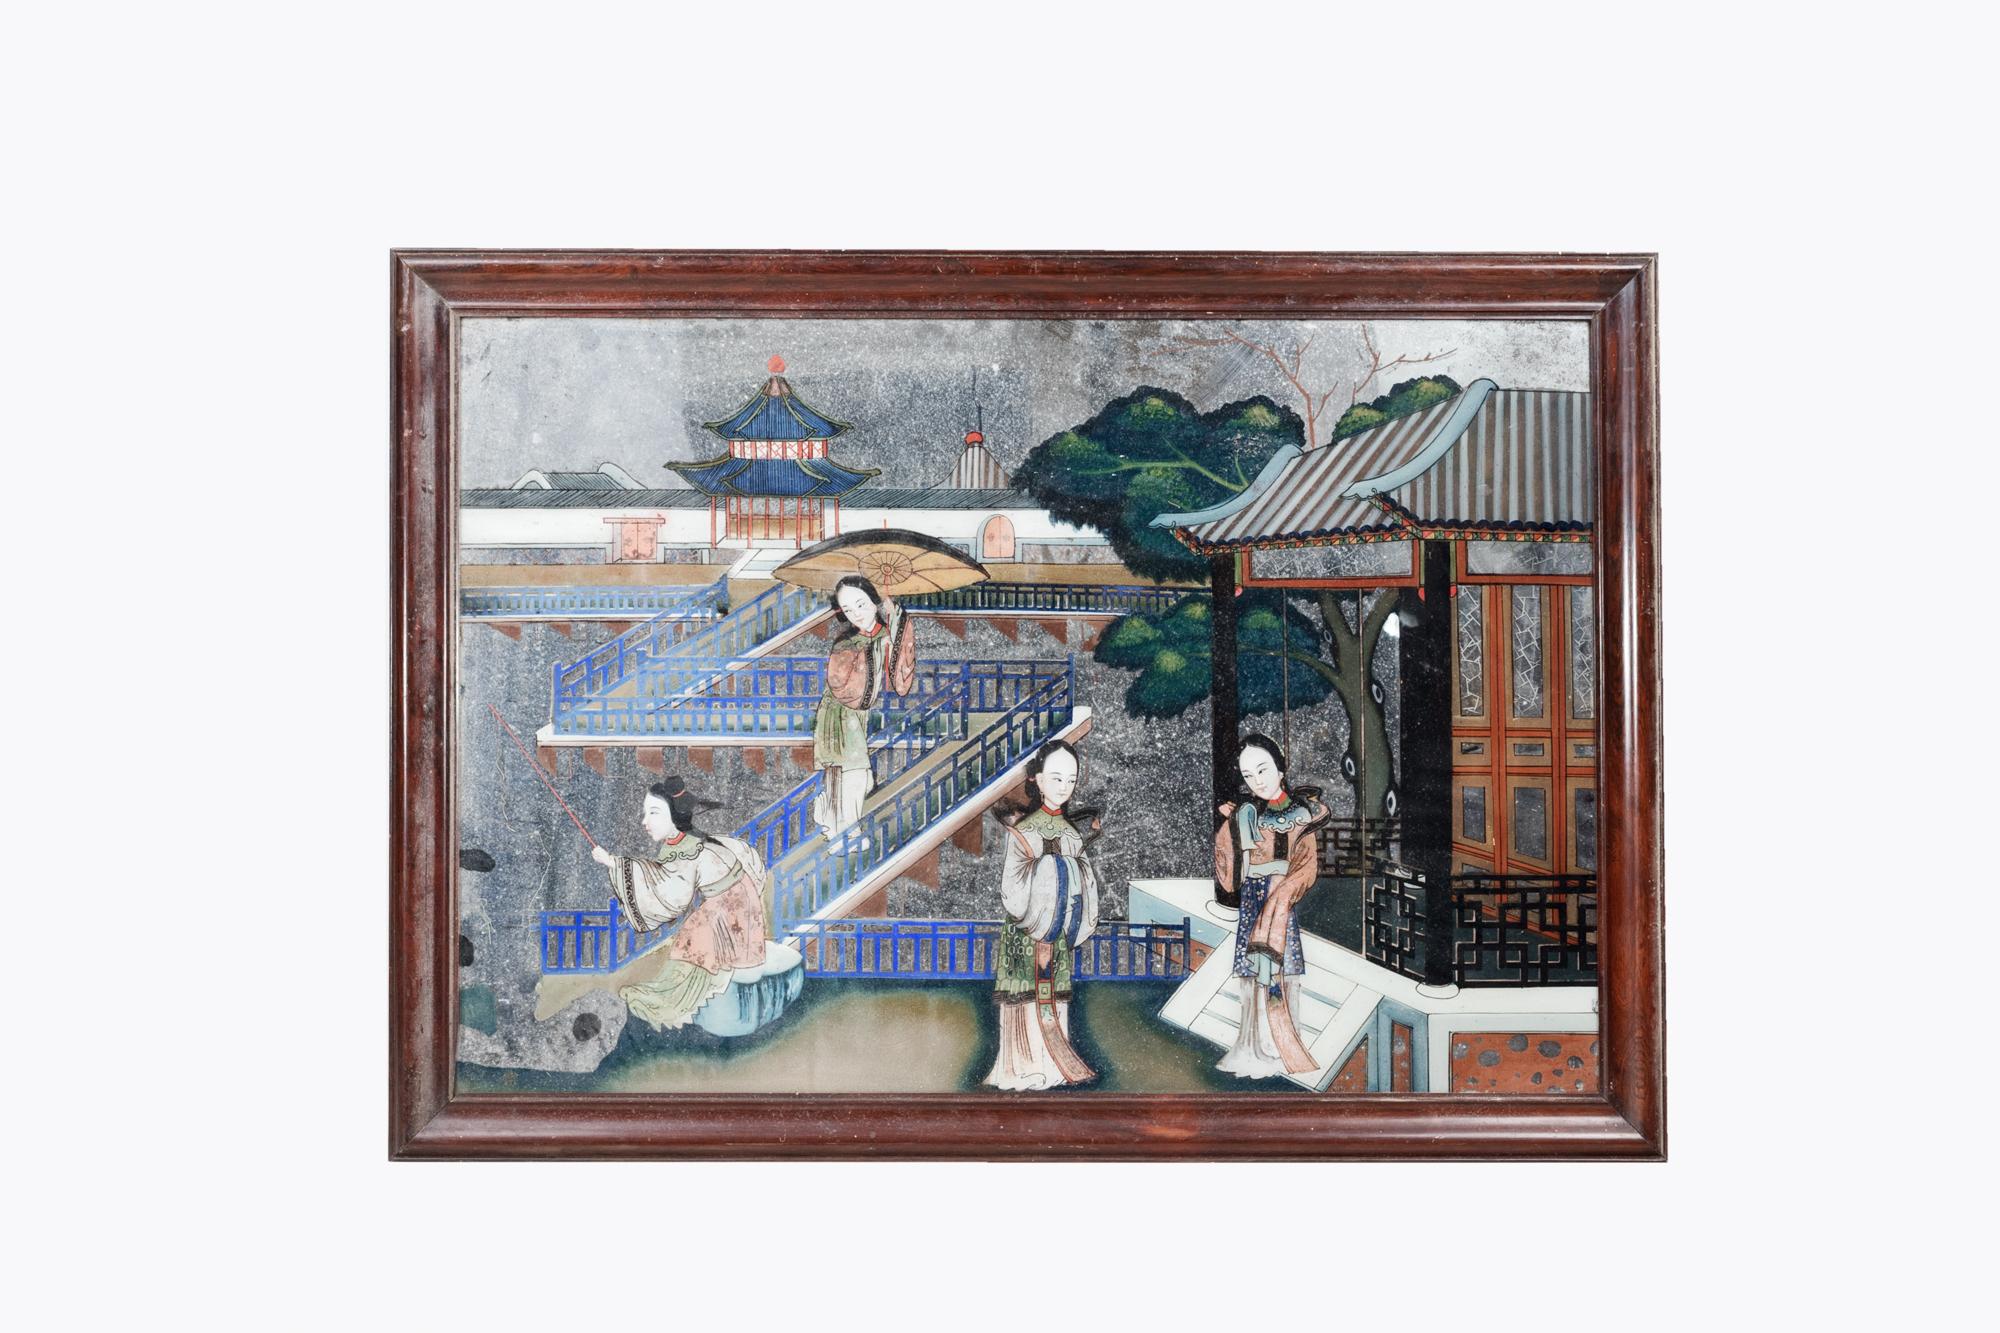 19th Century Chinese Reverse Painted Mirror depicting a Court Scene. Featuring four ladies in traditional garments, including one fishing, along with a bridge to the centre and pagodas, rendered in vibrant shades.

To create the reverse glass